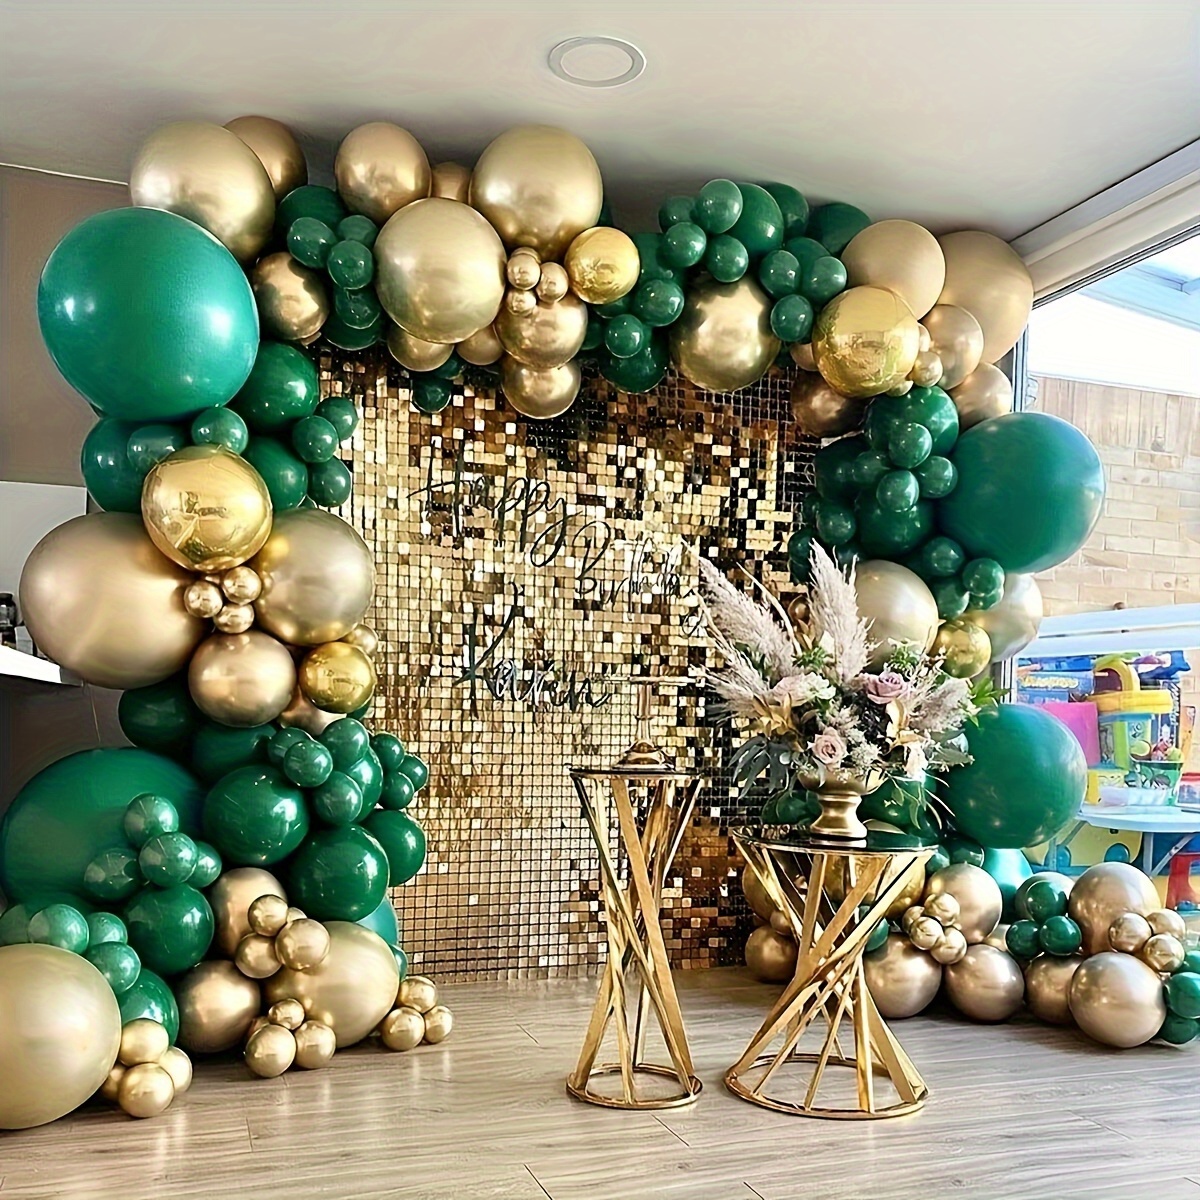 

136pcs Christmas Party Balloon Garland, Christmas House Decor Dark Emerald Green Sage Green Metallic Gold Balloons Set For Christmas, New Year Eve Party, Wedding Party Decoration Easter Gift